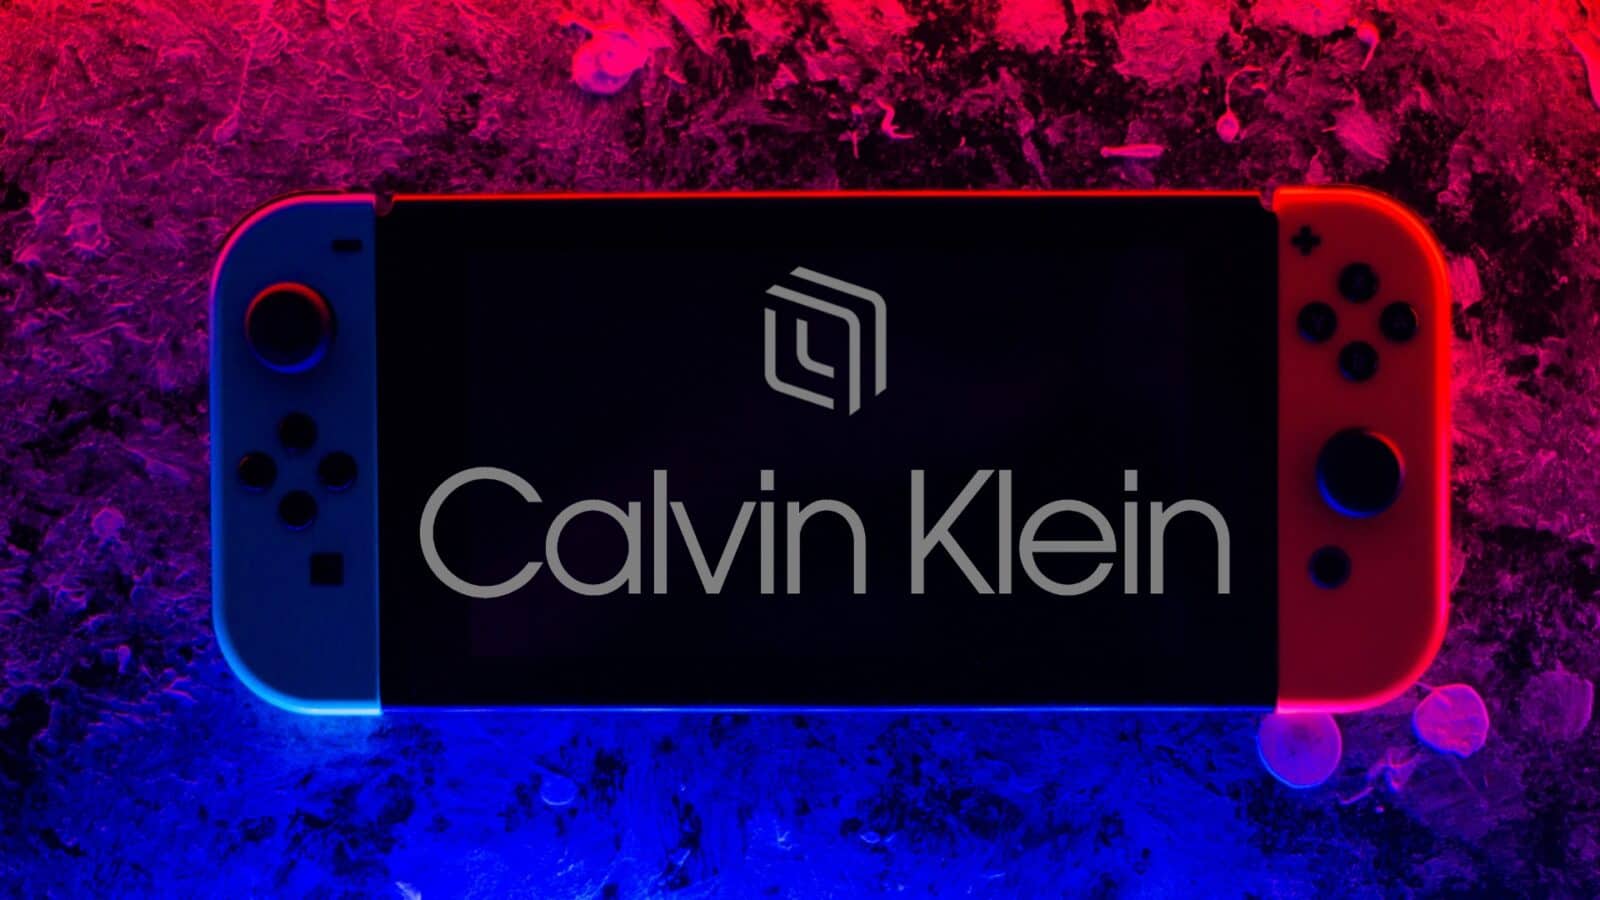 Calvin Klein Launches a Gaming Experience With Ready Player Me